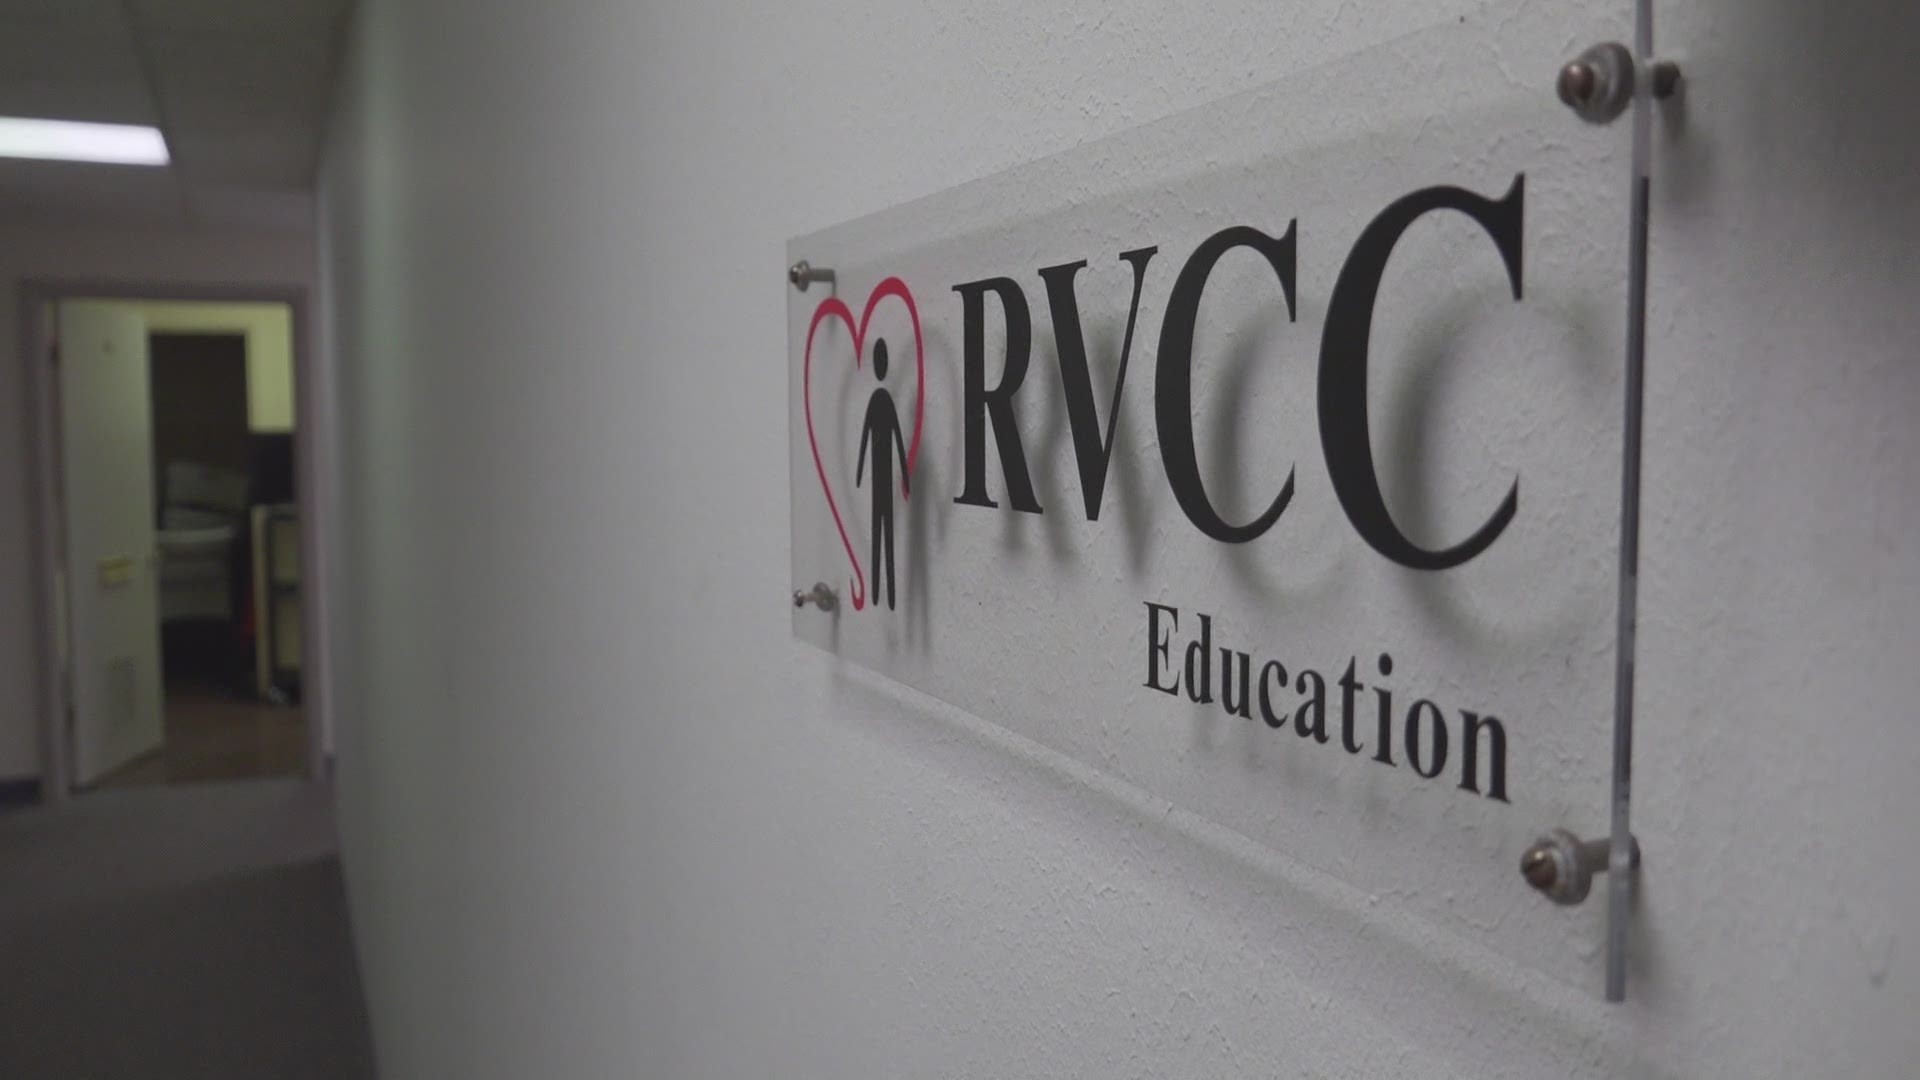 The RVCC plans on spending the fund on educating the community on the importance of violence prevention.